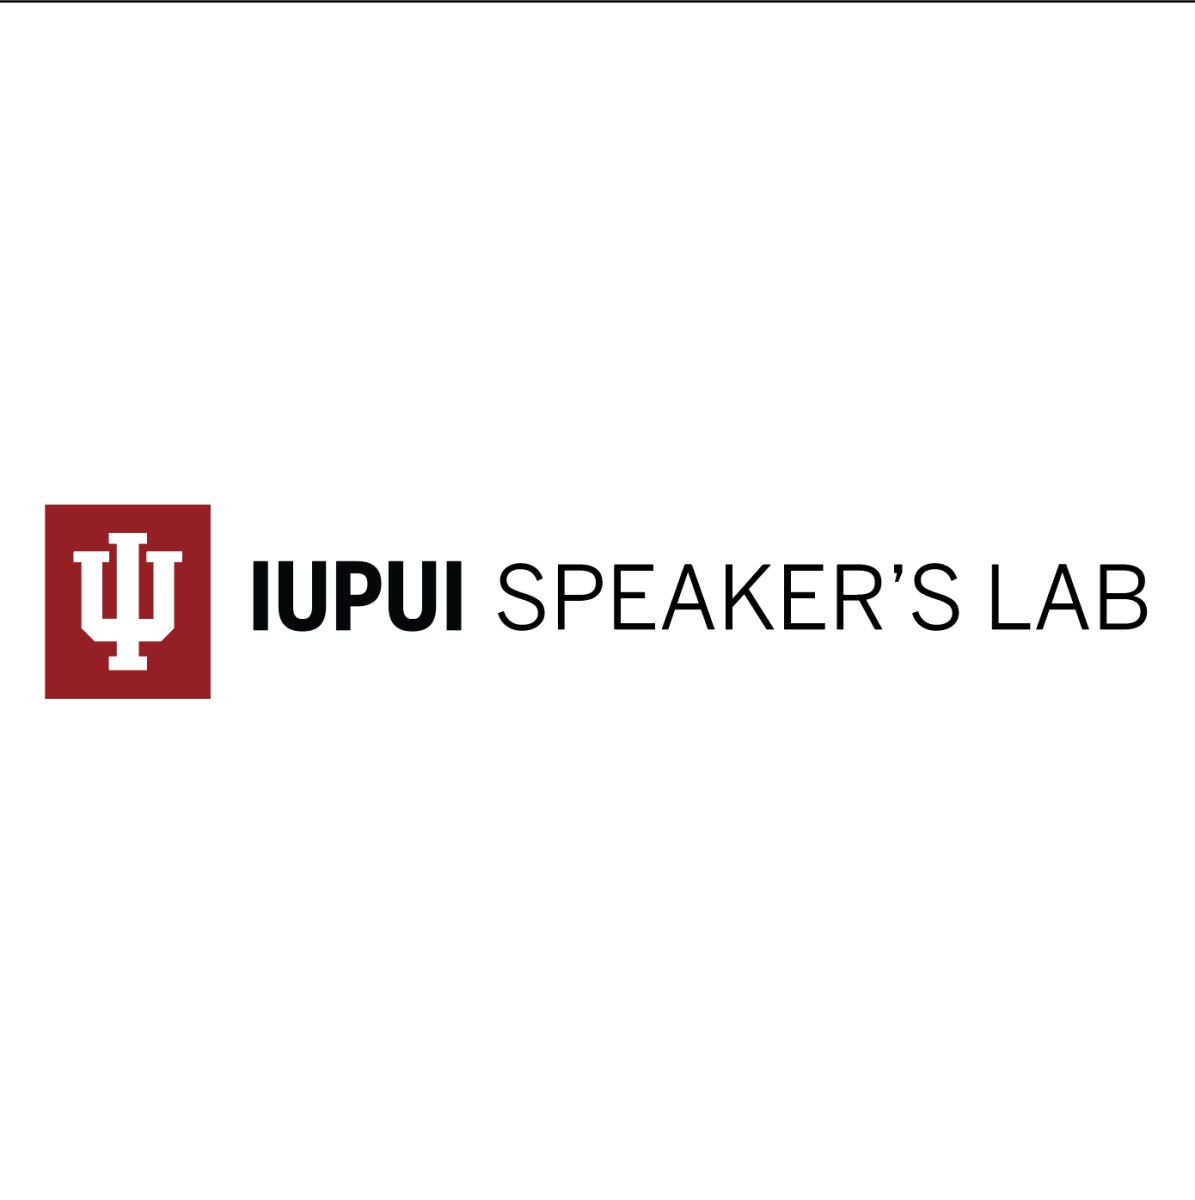 The IUPUI Speaker's Lab is here to assist with all public speaking related needs! We are located in Cavanaugh Hall 001-G. Stop by or make an appointment today!